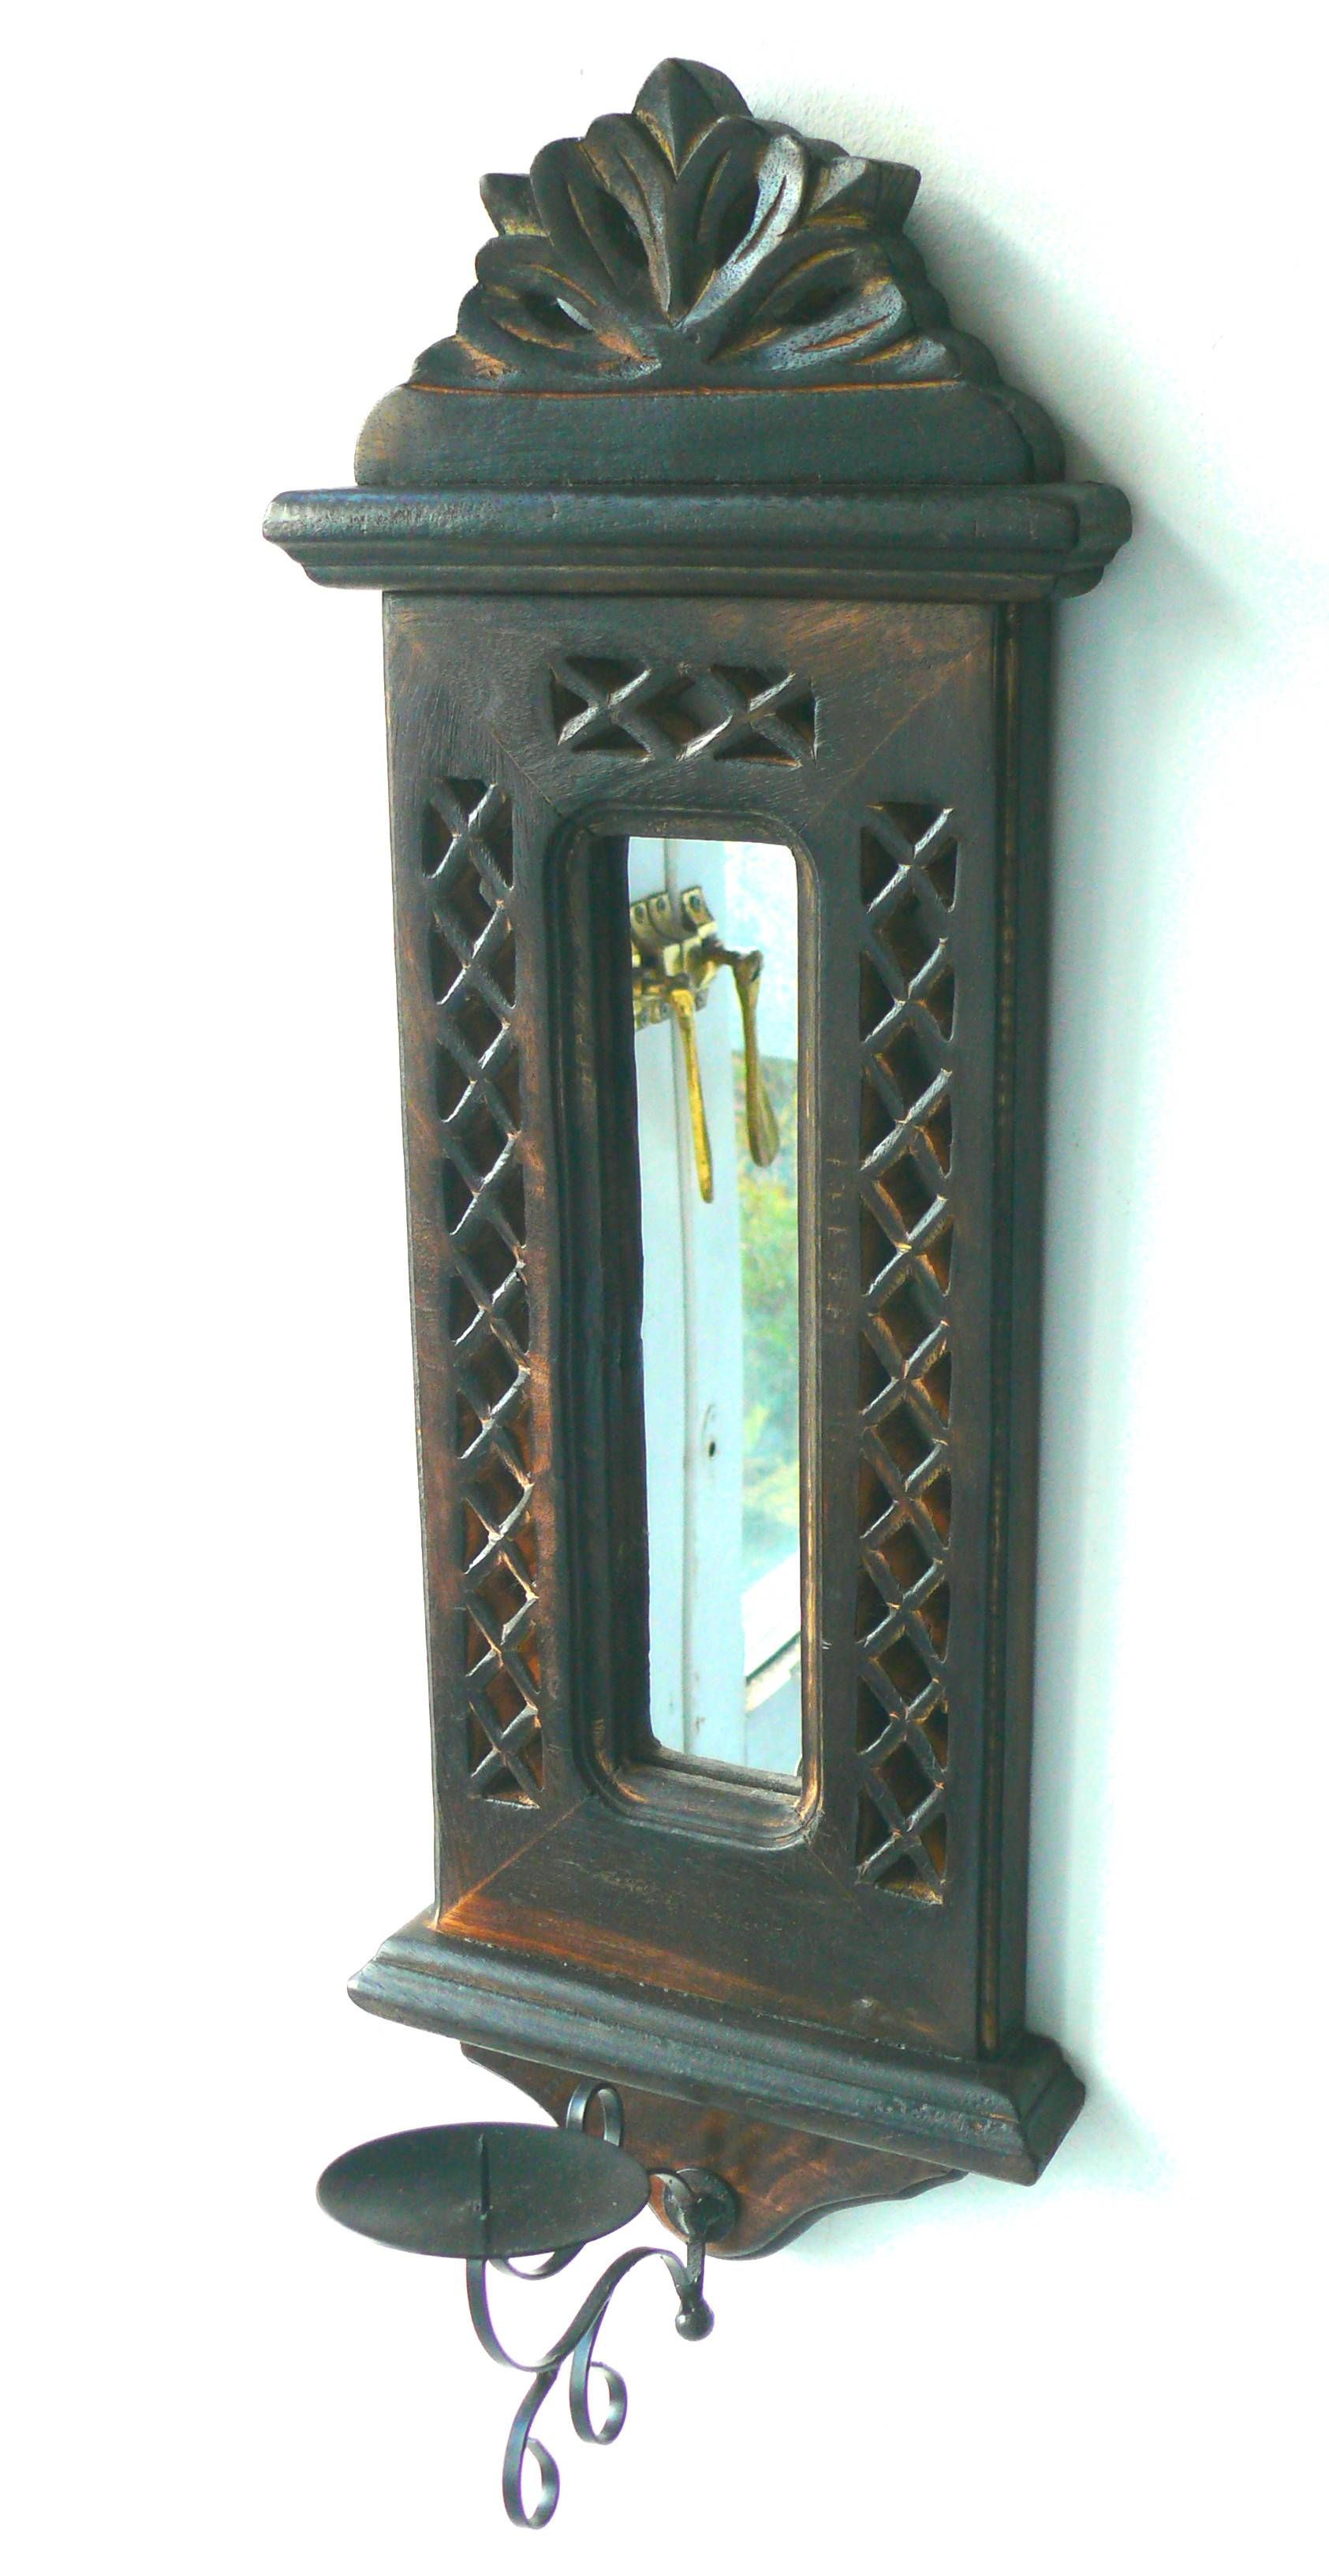 Gothic Wall Mounted Mirror And Candle Holder – The Camphor Tree Inside Gothic Wall Mirrors (View 23 of 25)